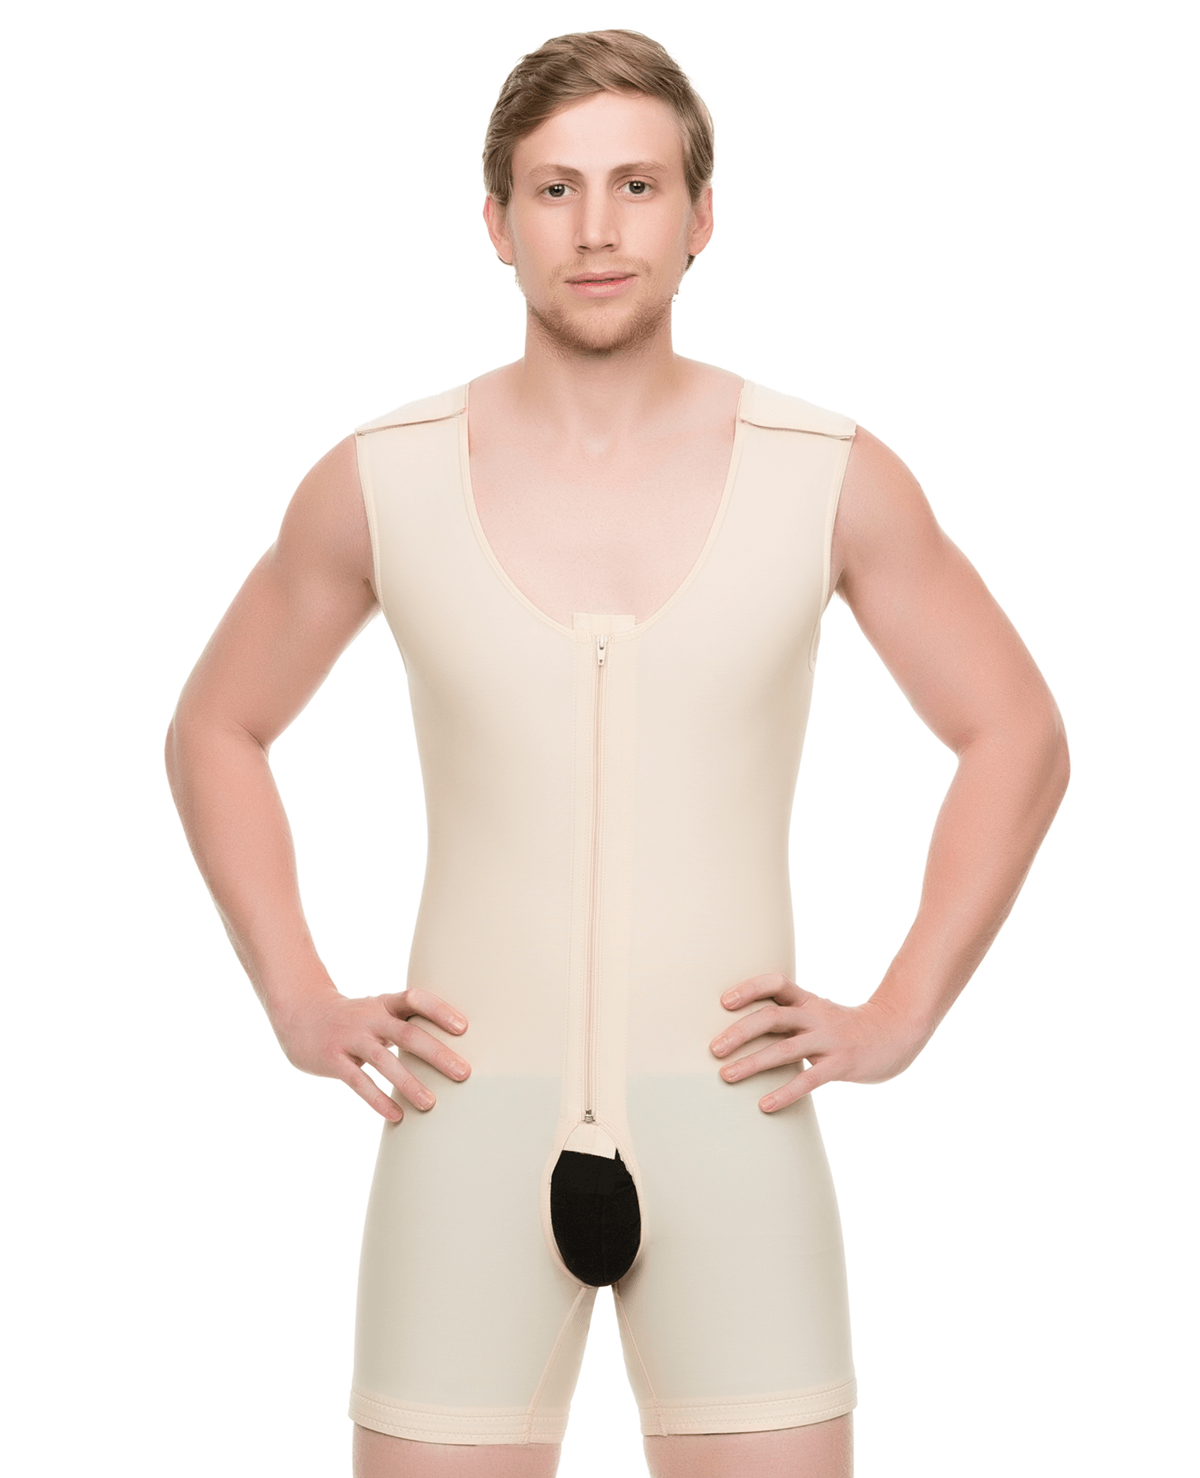 http://isavela.com/cdn/shop/products/Isavela_Compression_Garments_Fajas_Plastic-Surgery_Recovery-Garment_body-contour_post-surgical_support_male_full_body_above_knee_length_abdominal_cosmetic_surgery_compression_garment_8367beed-f1c7-4e37-81b7-9ebc47ac90e1.png?v=1683248020